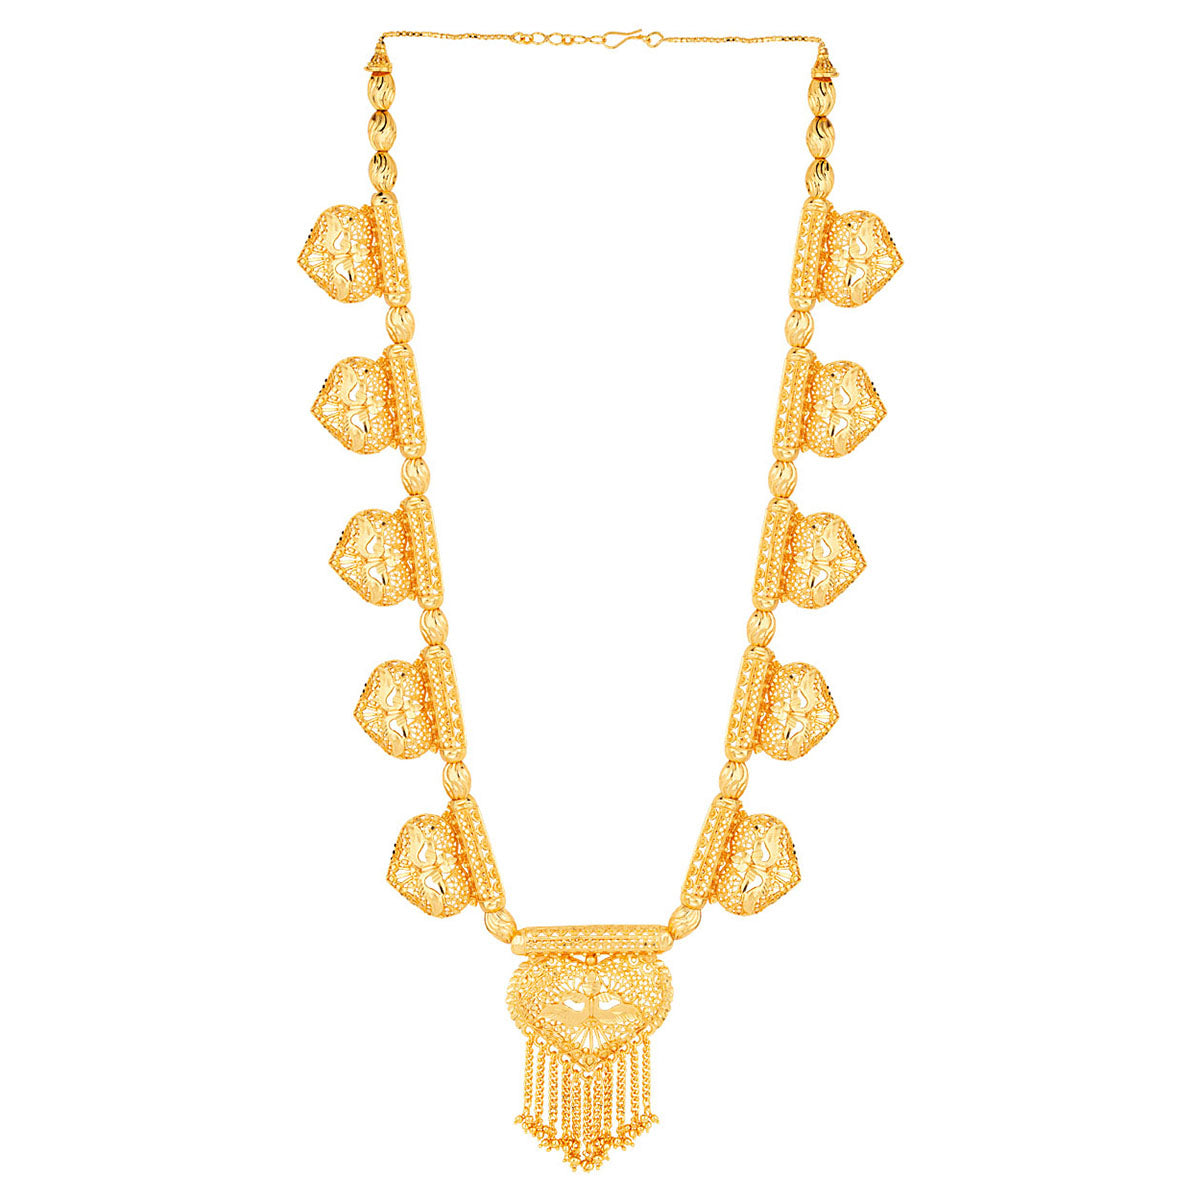 Eastern Delight Temple Design Necklace Set Combo